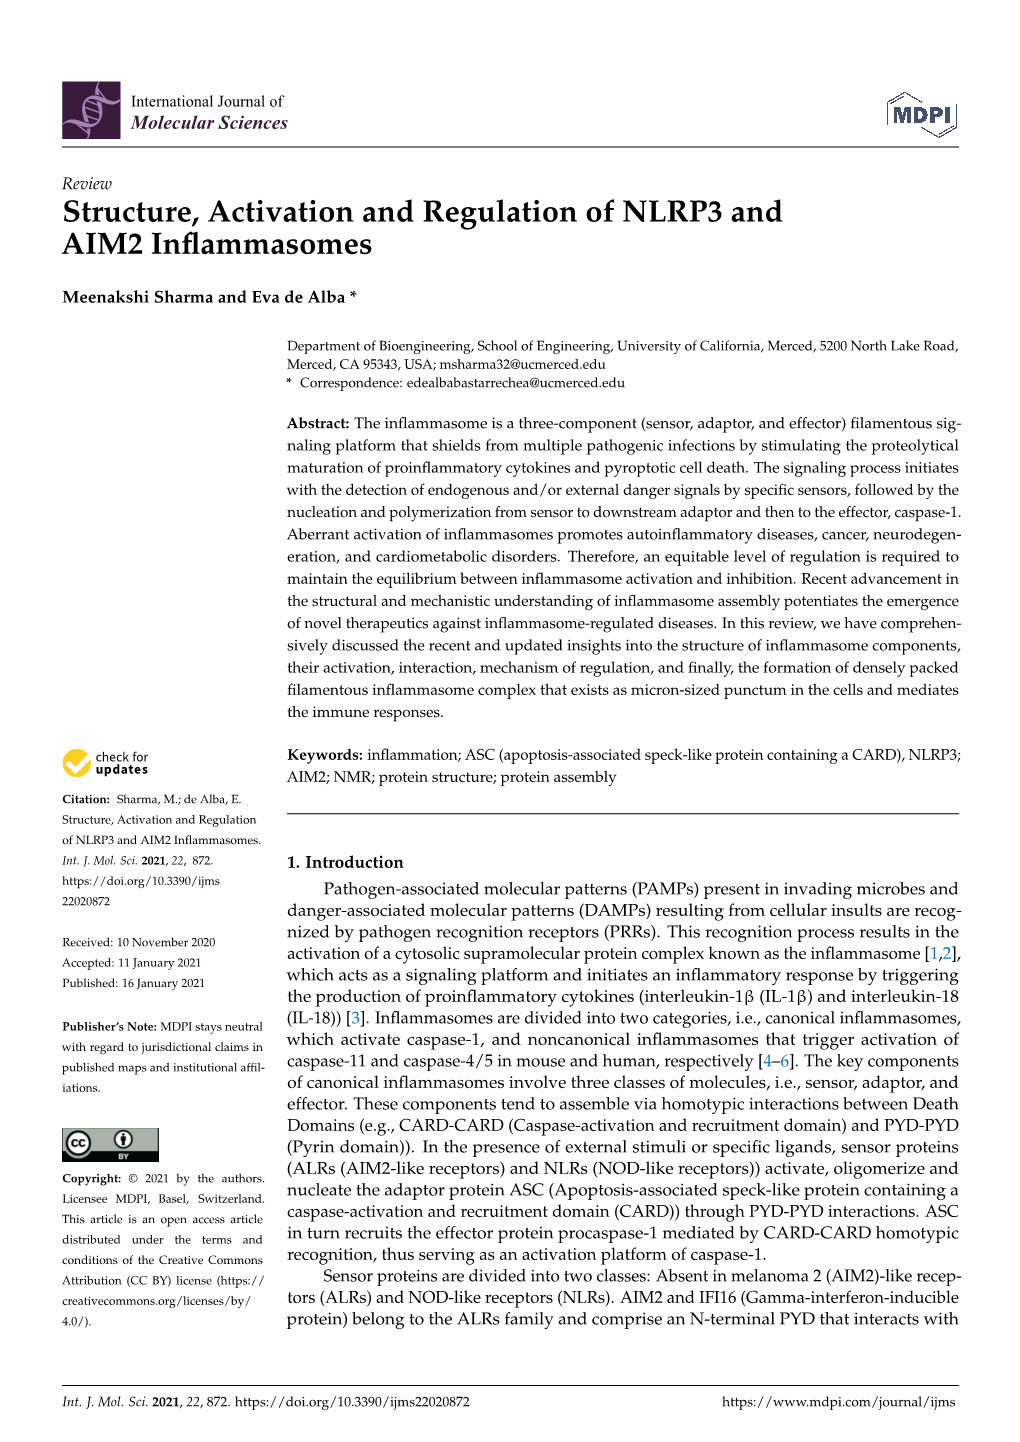 Structure, Activation and Regulation of NLRP3 and AIM2 Inflammasomes